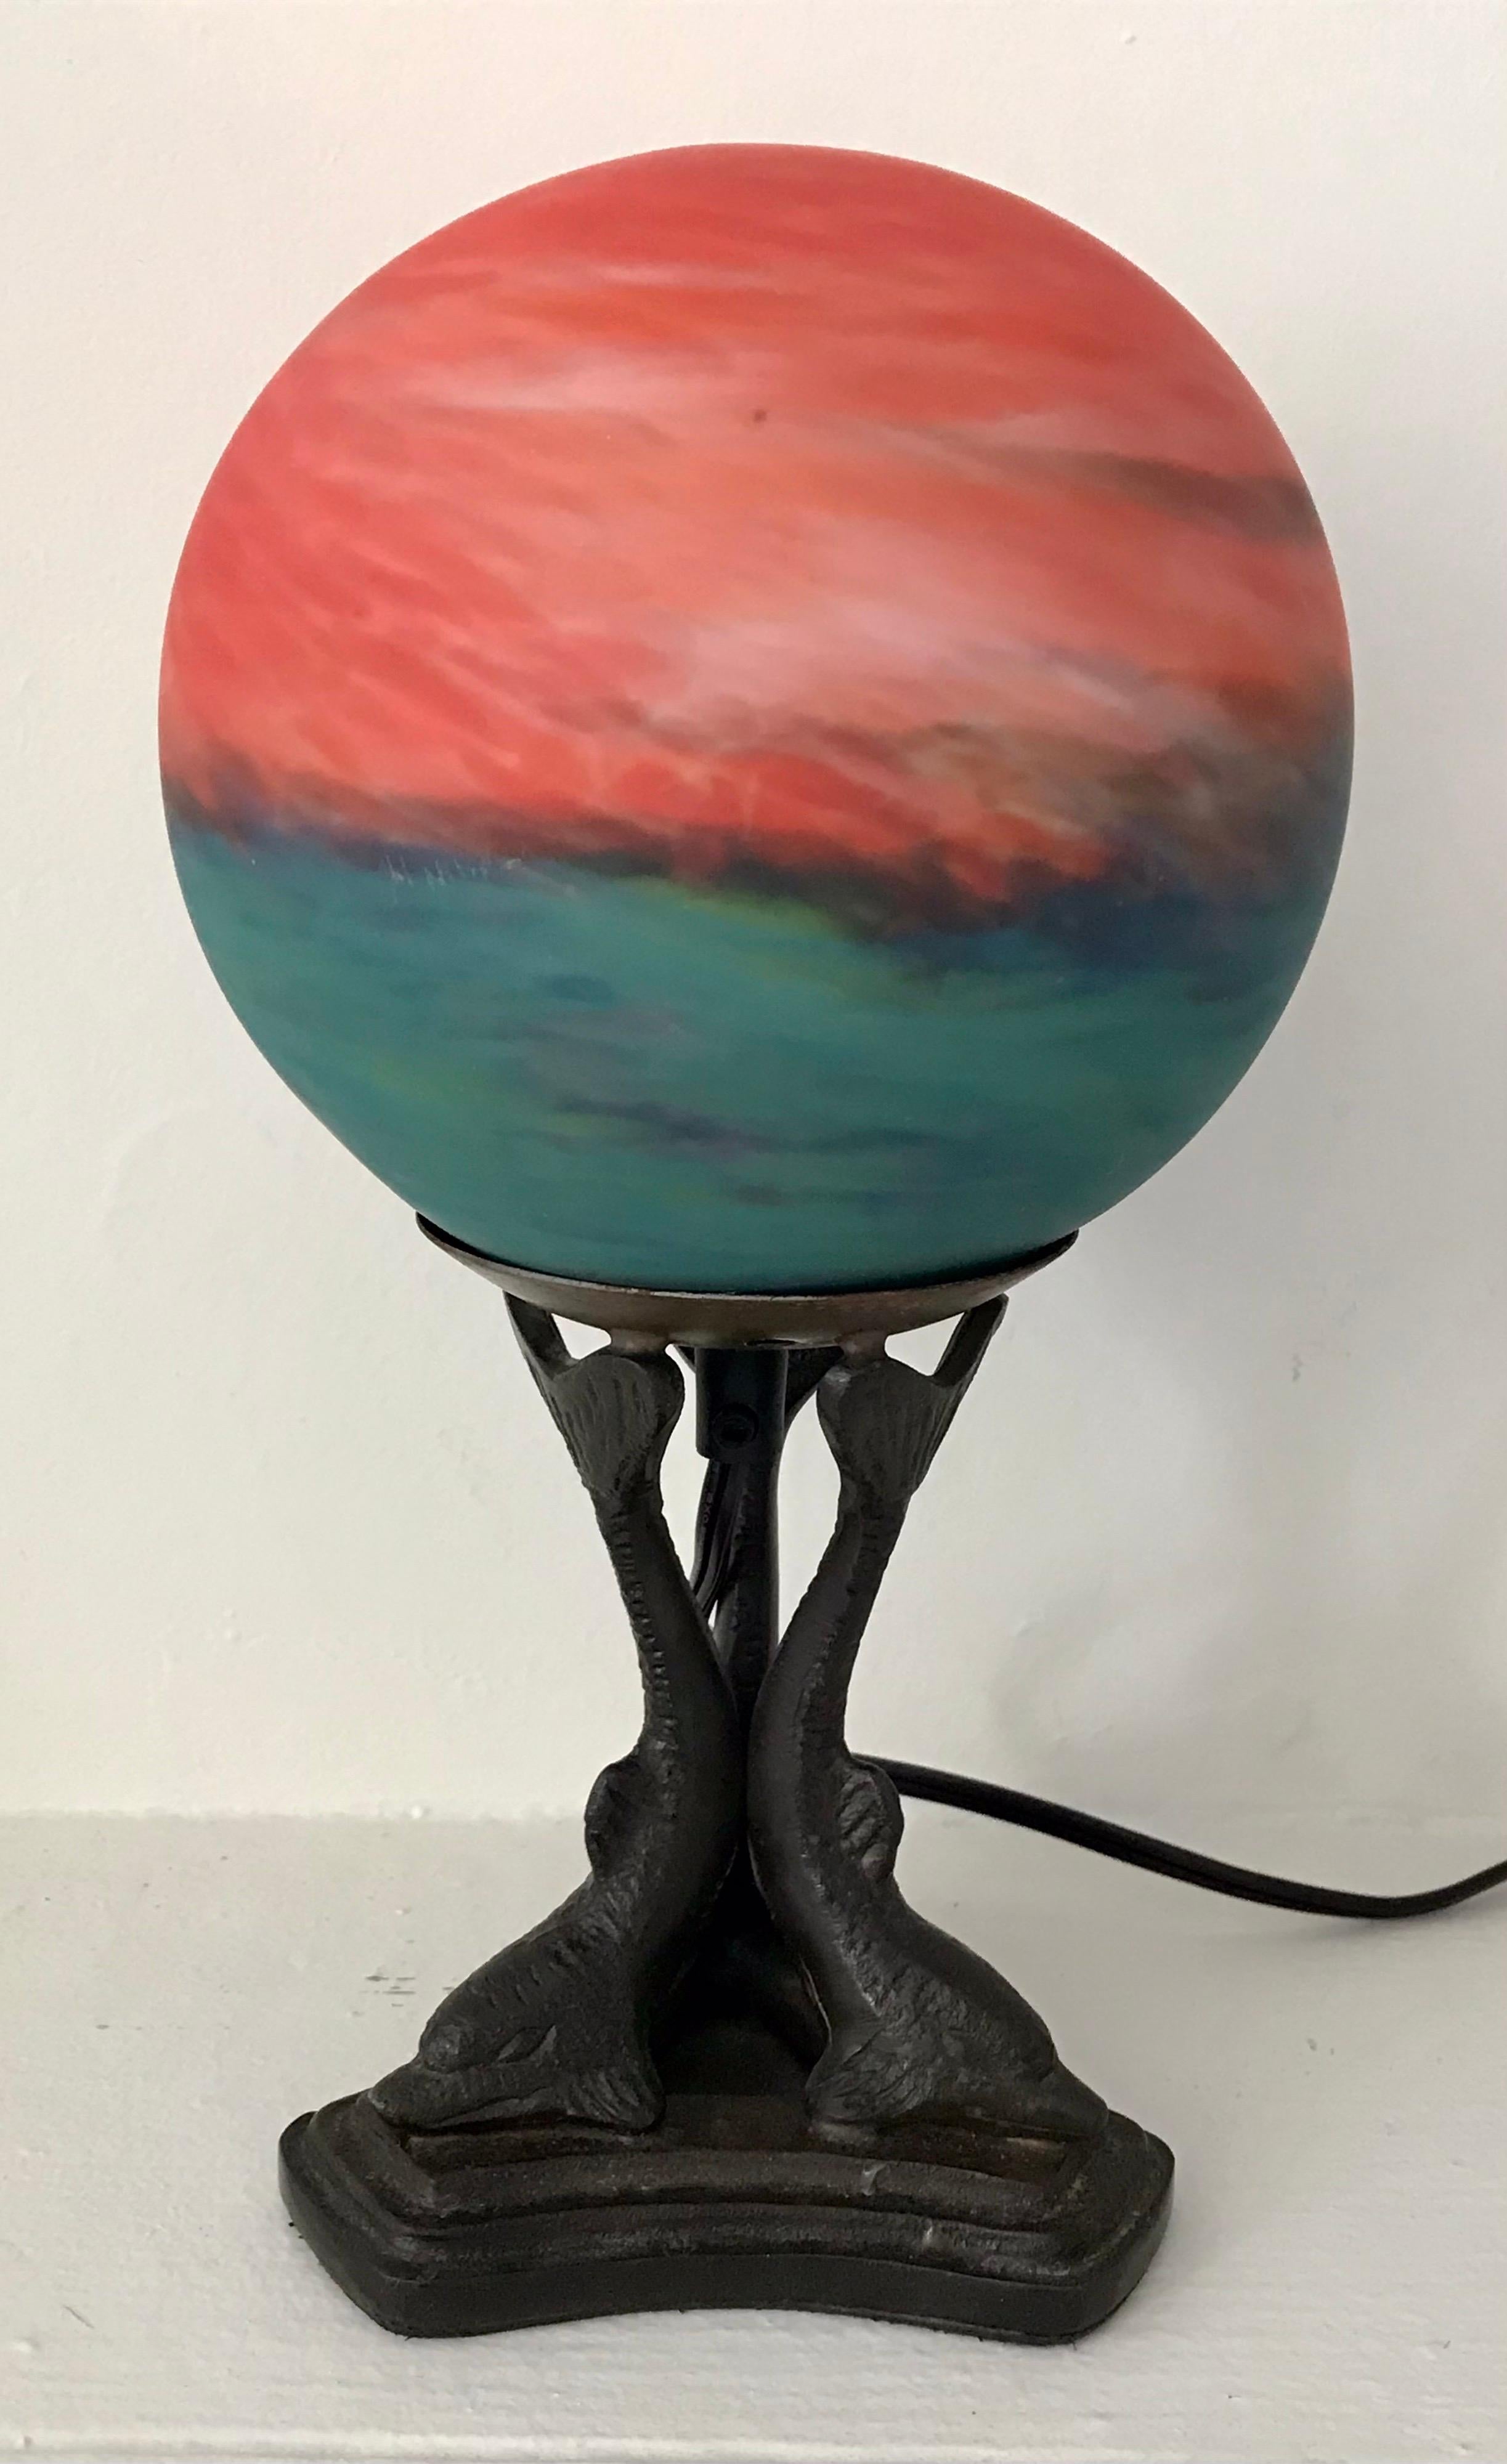 Beautiful colorful art glass globe table lamp mounted on cast metal dolphin base, 20th century, rewired with inline switch.